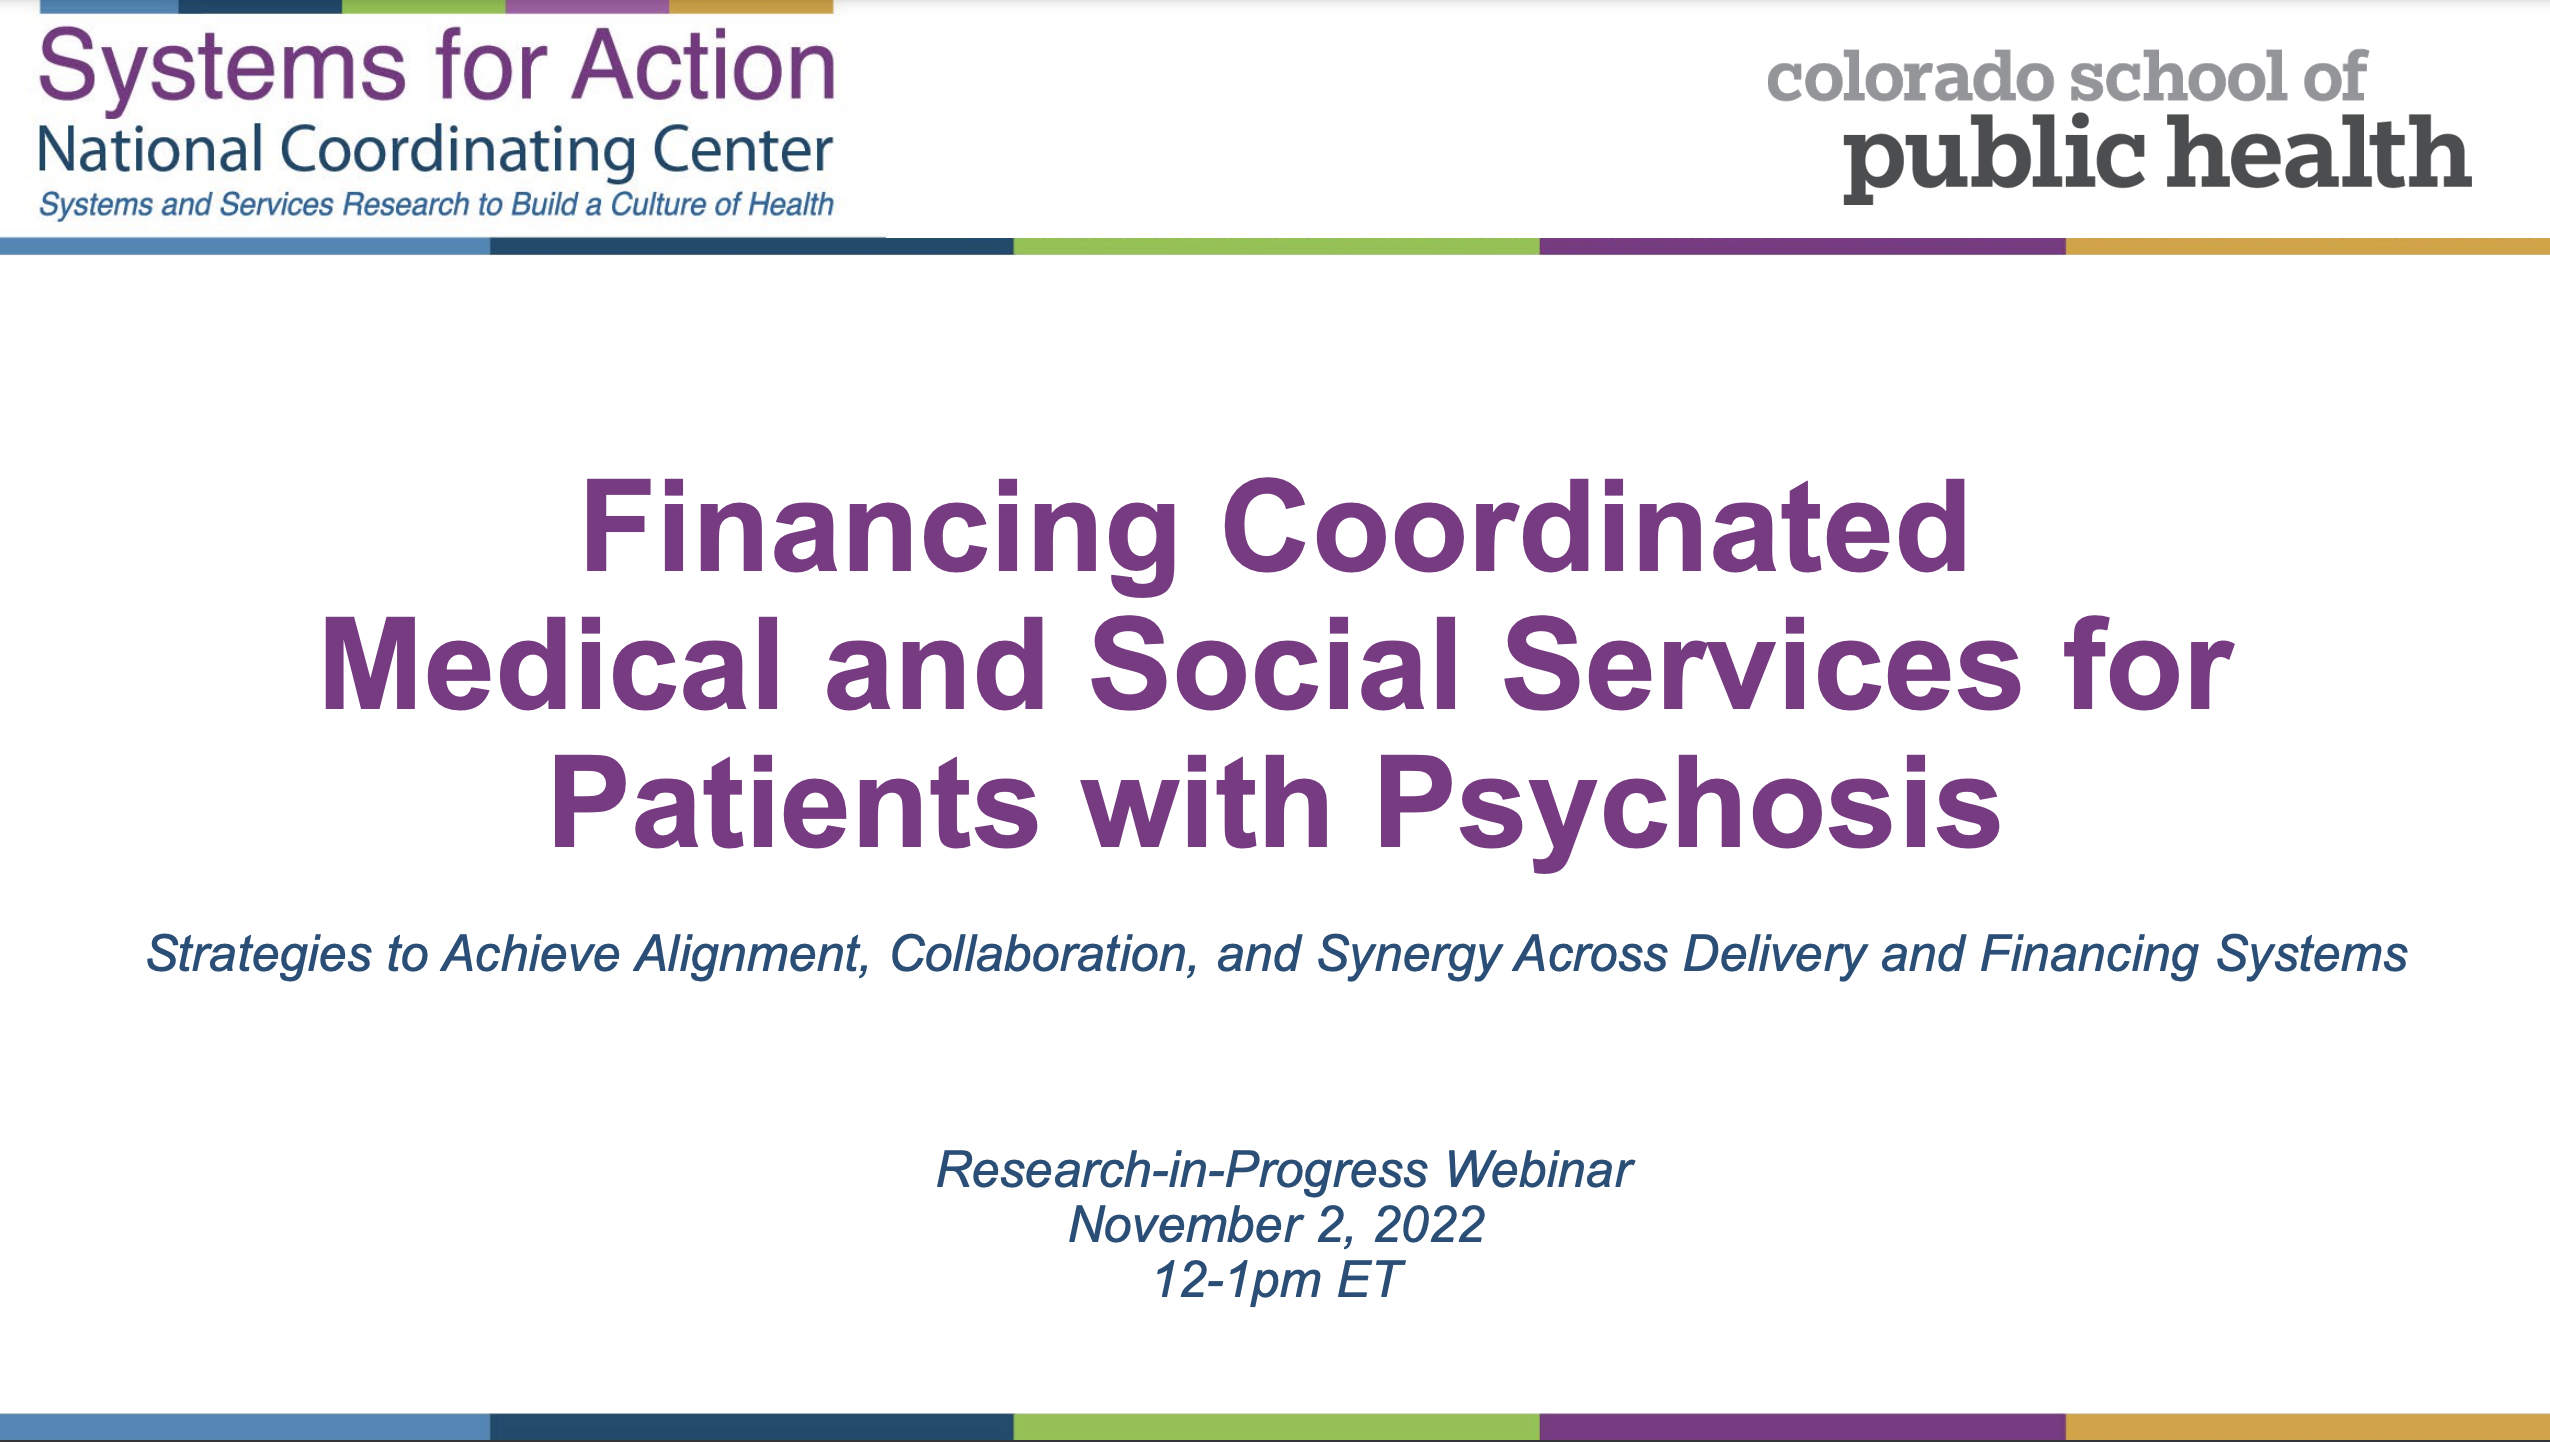 Financing Coordinated Medical and Social Services for Patients with Psychosis